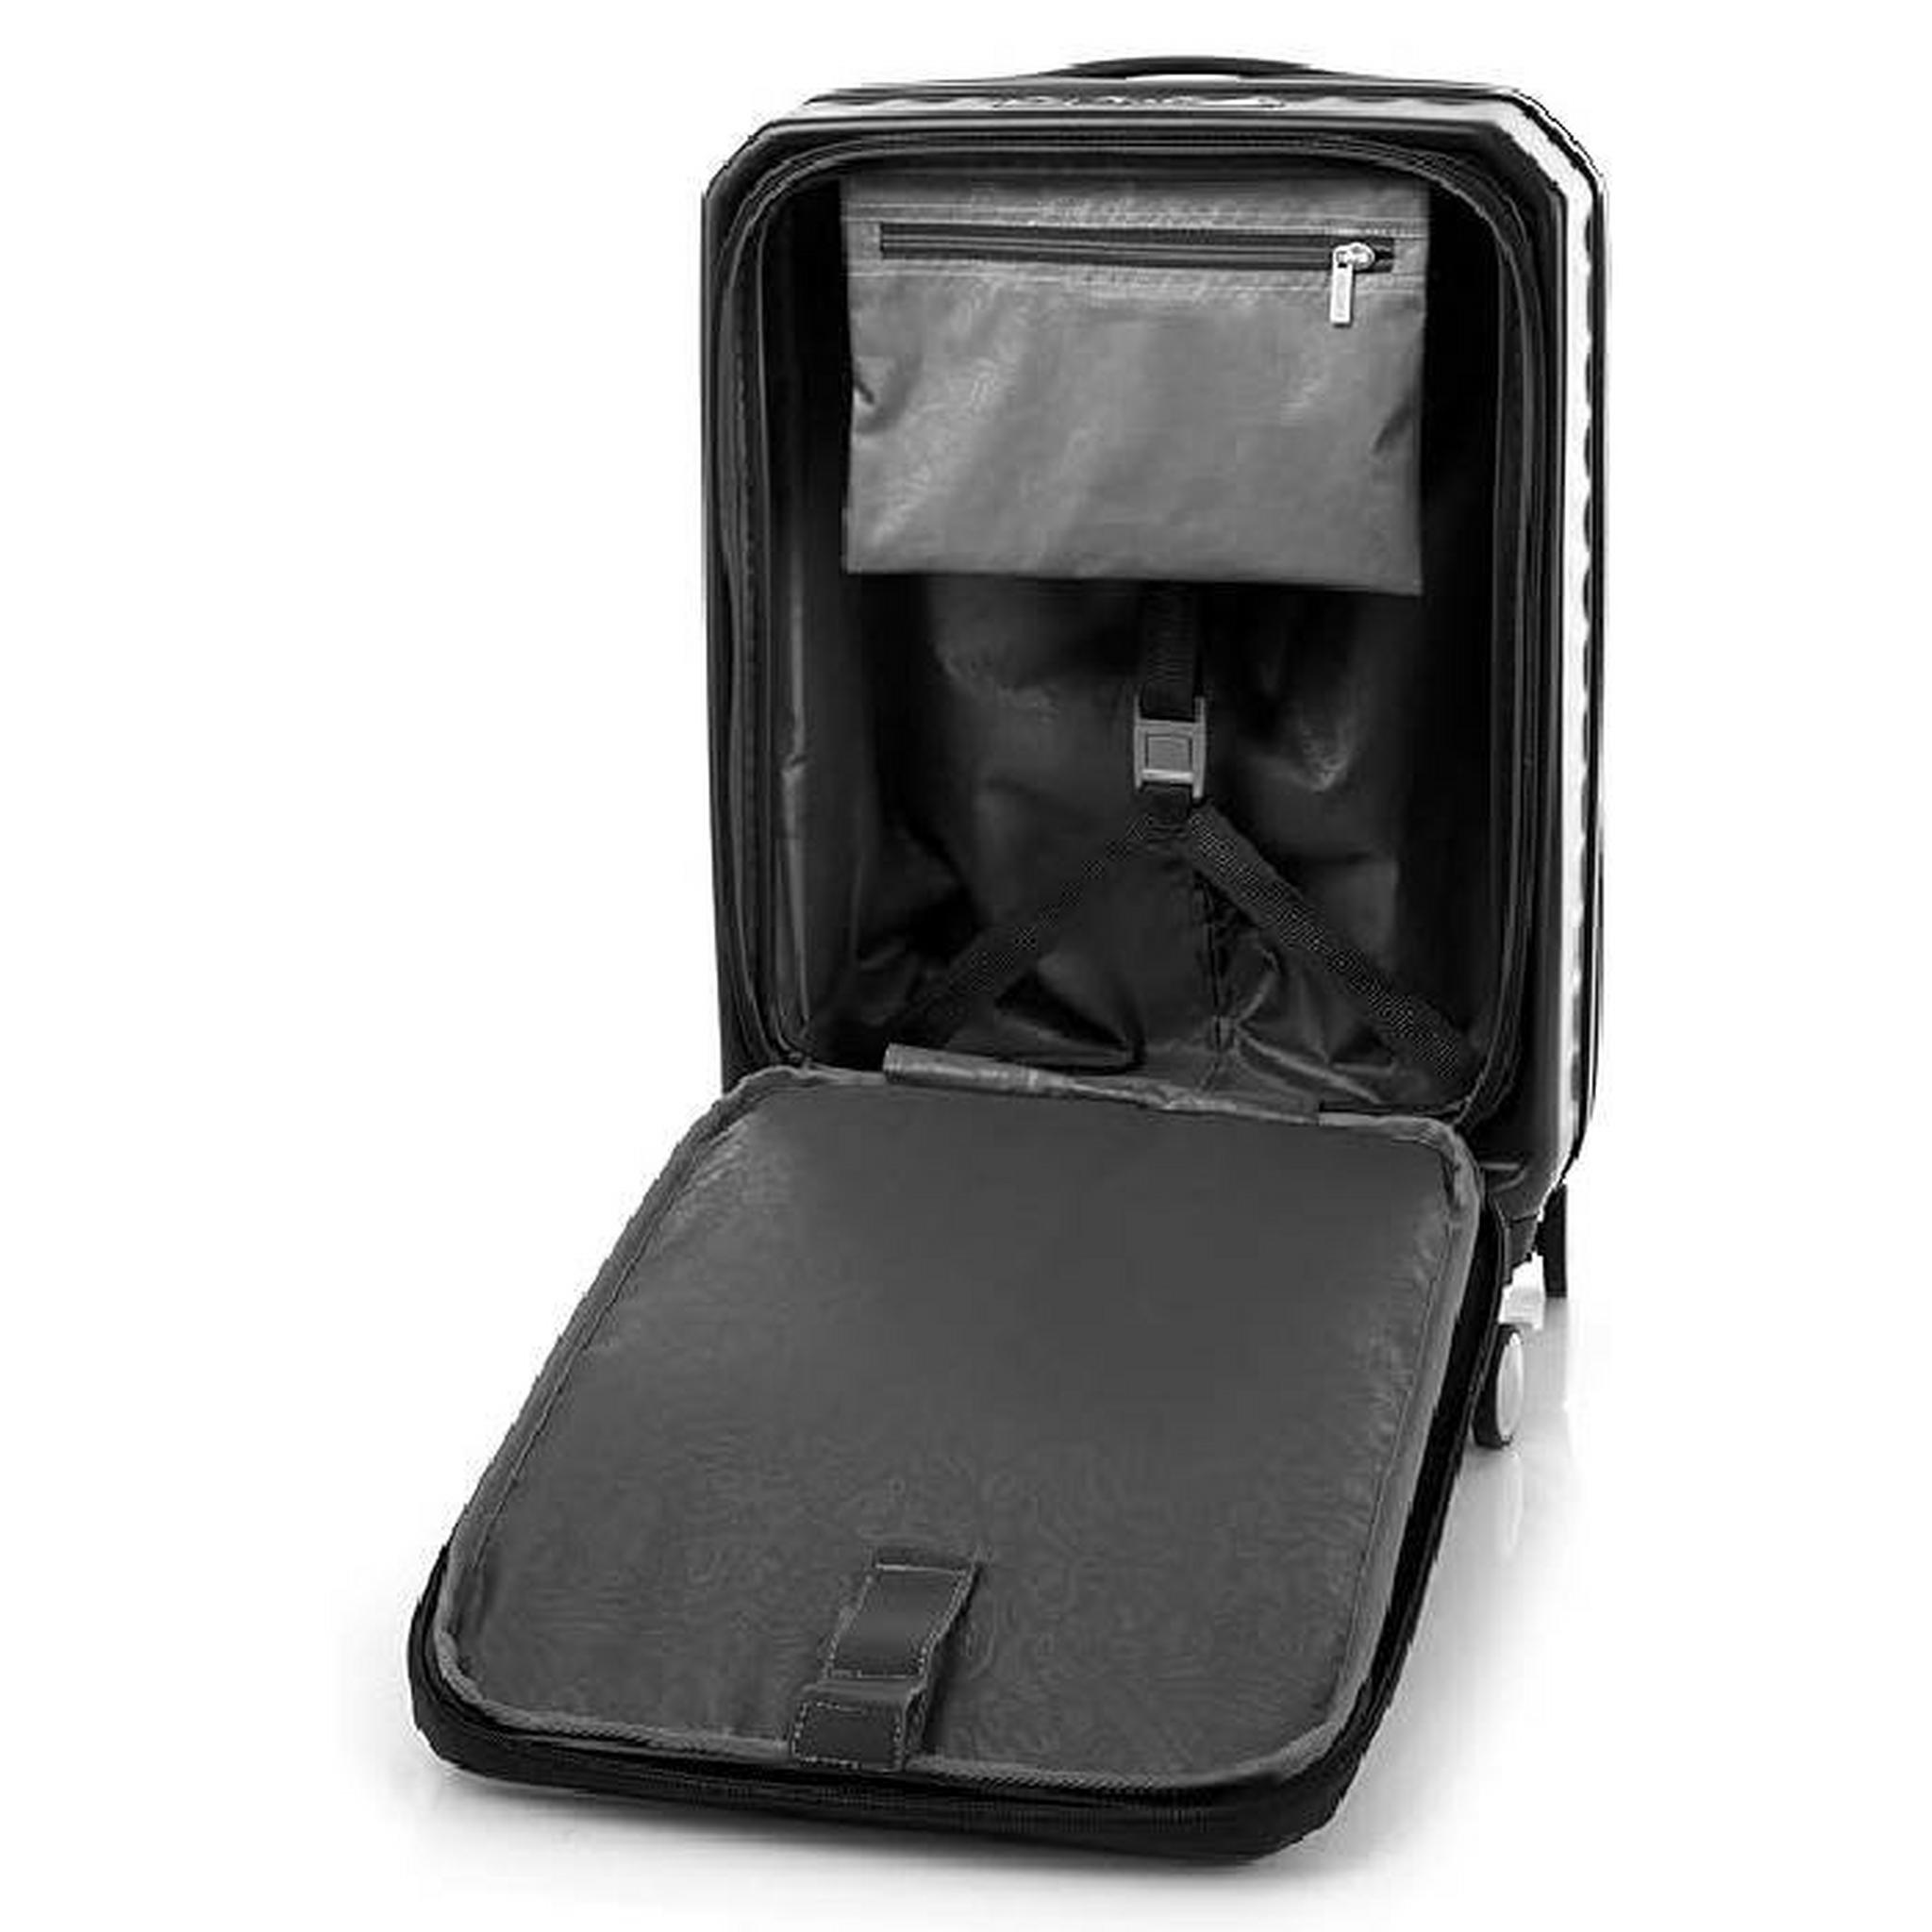 American Tourister 54cm Spinner Frontec Hard Luggage - Black